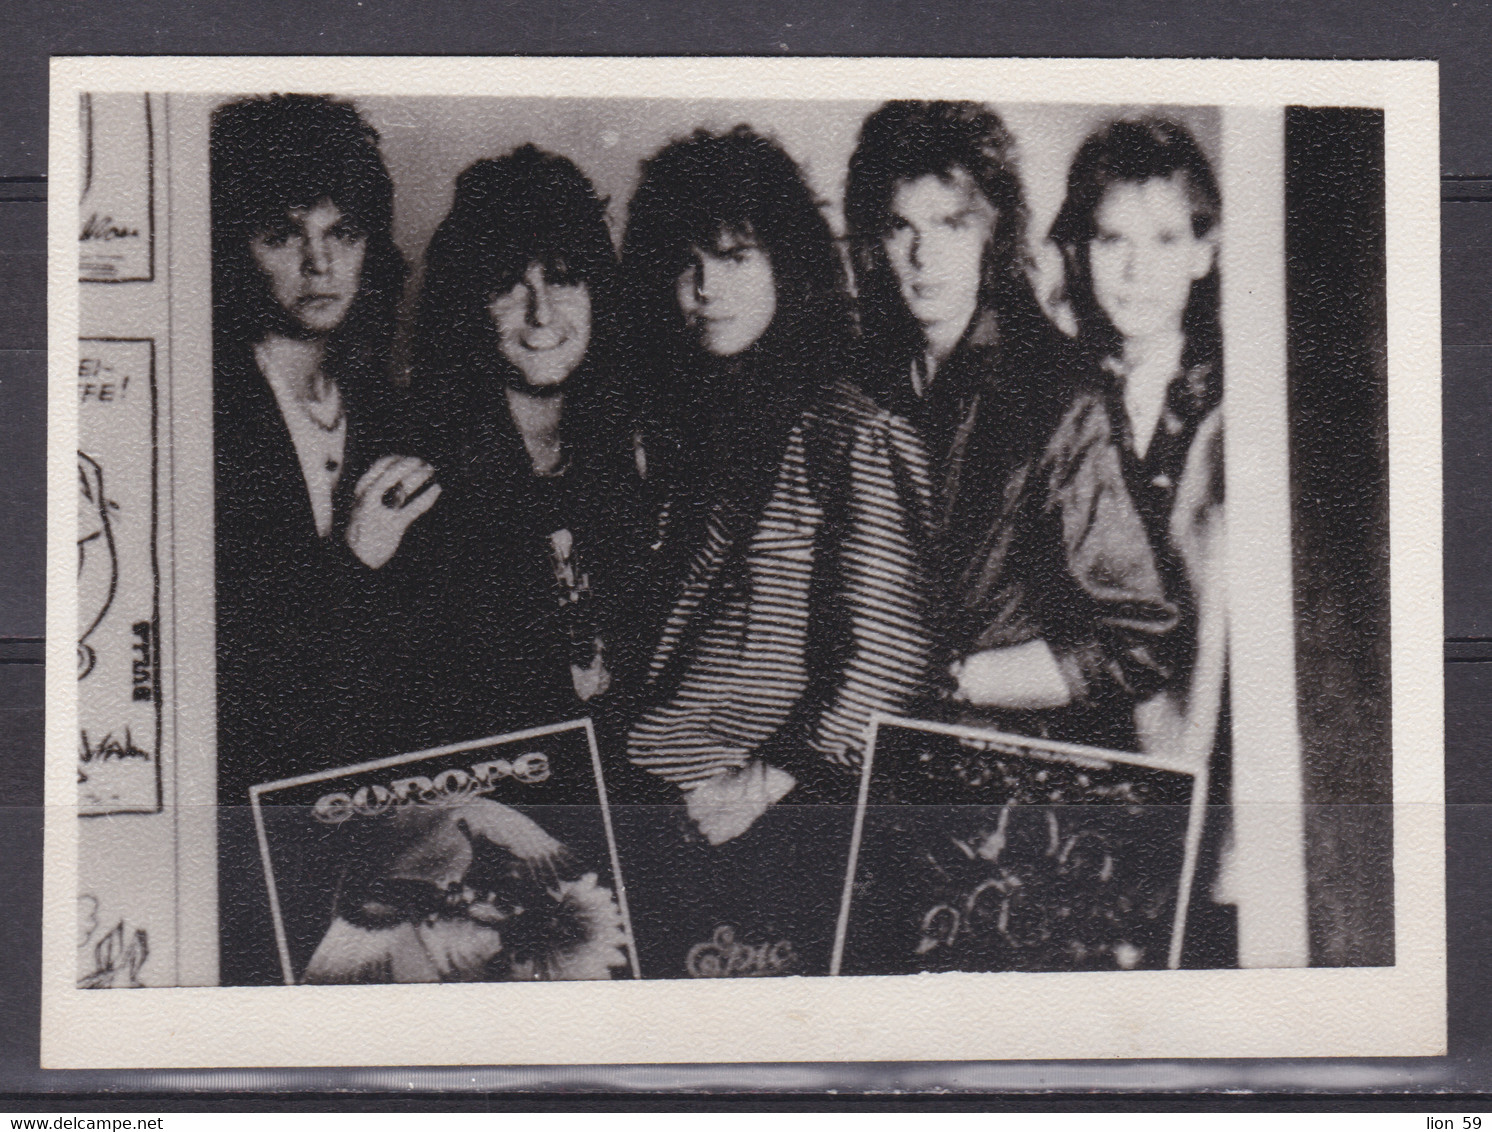 272895 / Europe (band) - Swedish Rock Band Formed In Upplands Väsby, Sweden In 1979, By Frontman Joey Tempest Photo - Foto